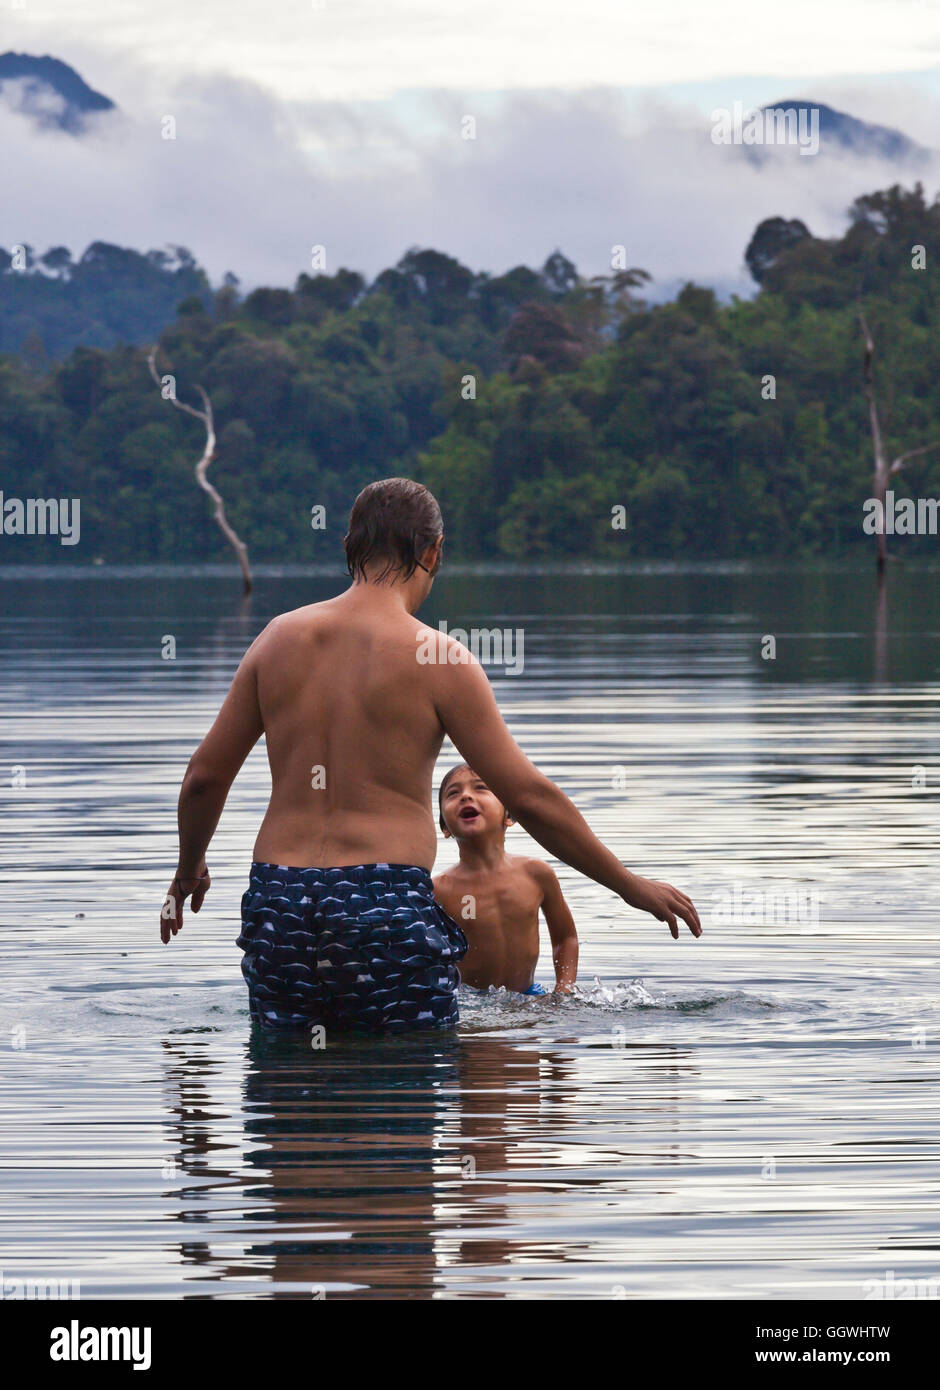 BODHI GARRETT with son BOON at the lake in KHAO SOK NATIONAL PARK - THAILAND Stock Photo